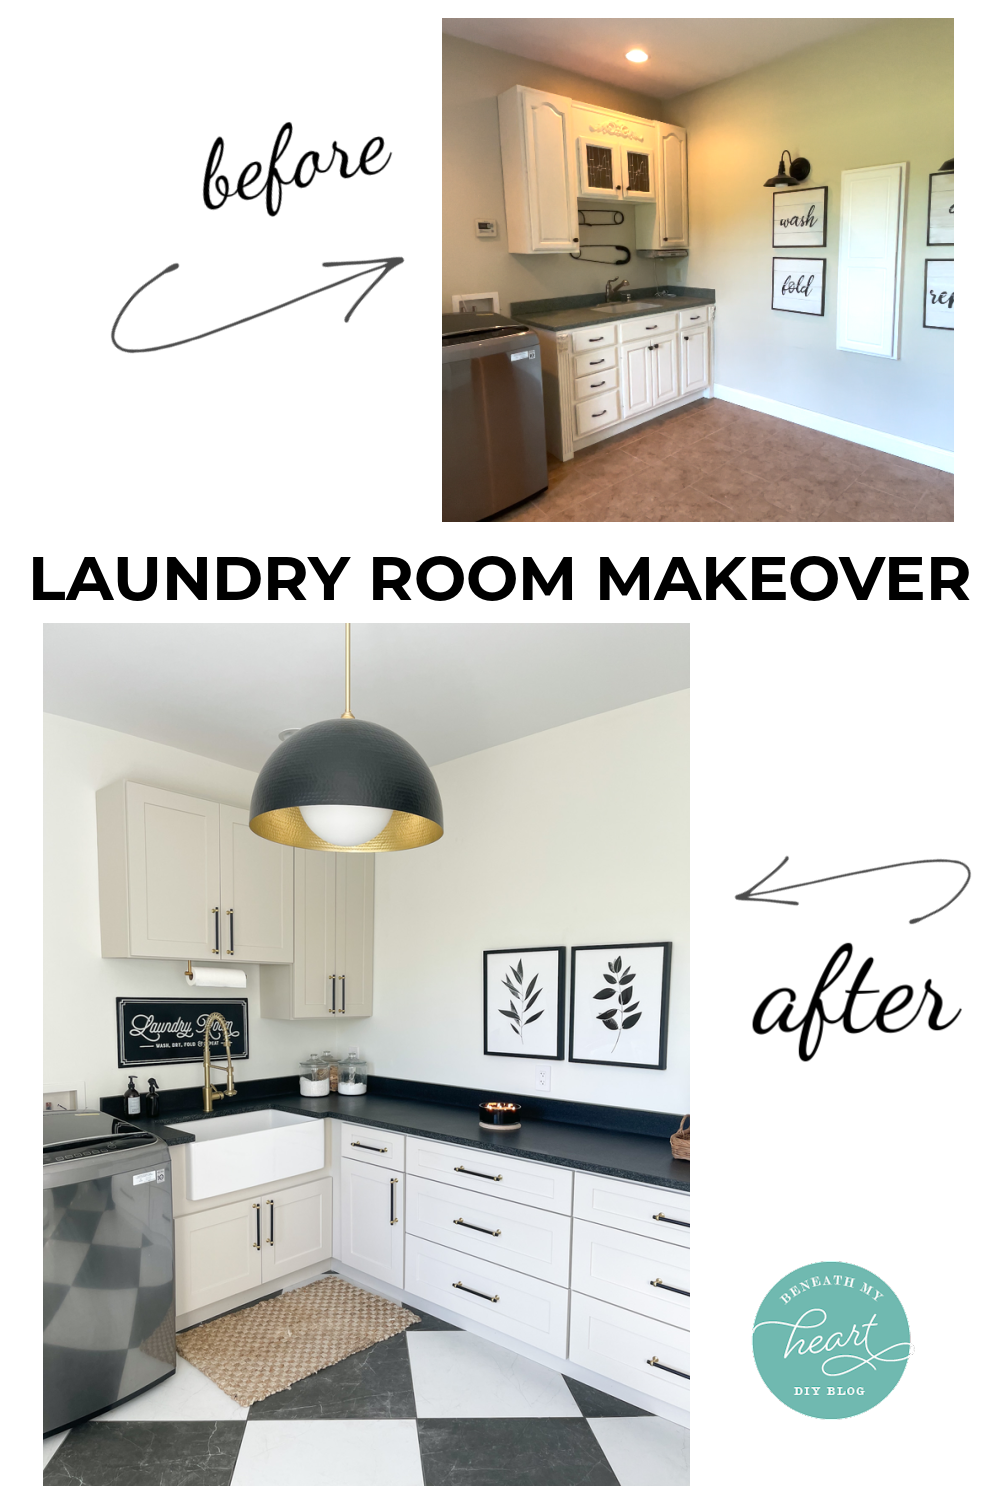 Gorgeous Laundry Room Makeover!